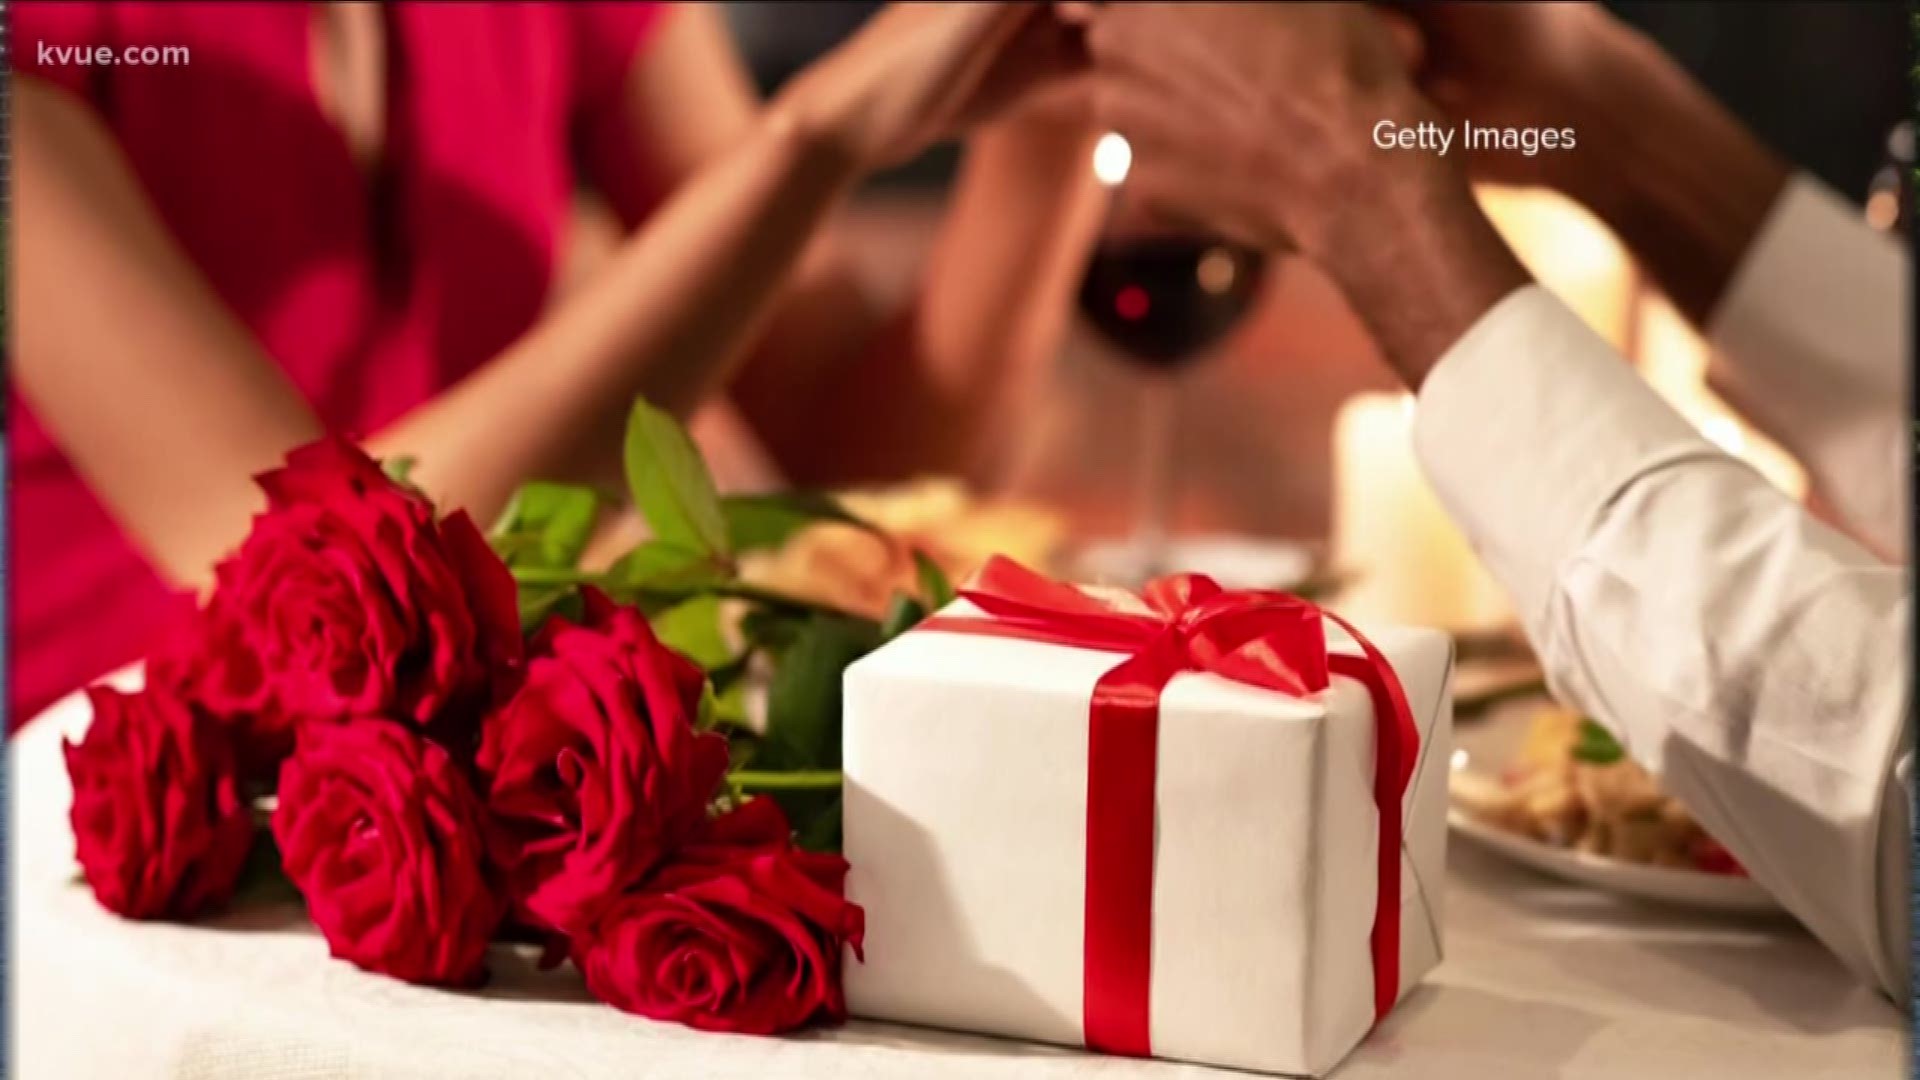 Valentine’s Day is approaching, and some singles are turning to dating services to find that special someone. Carlos Villalobos joined KVUE to share some tips.